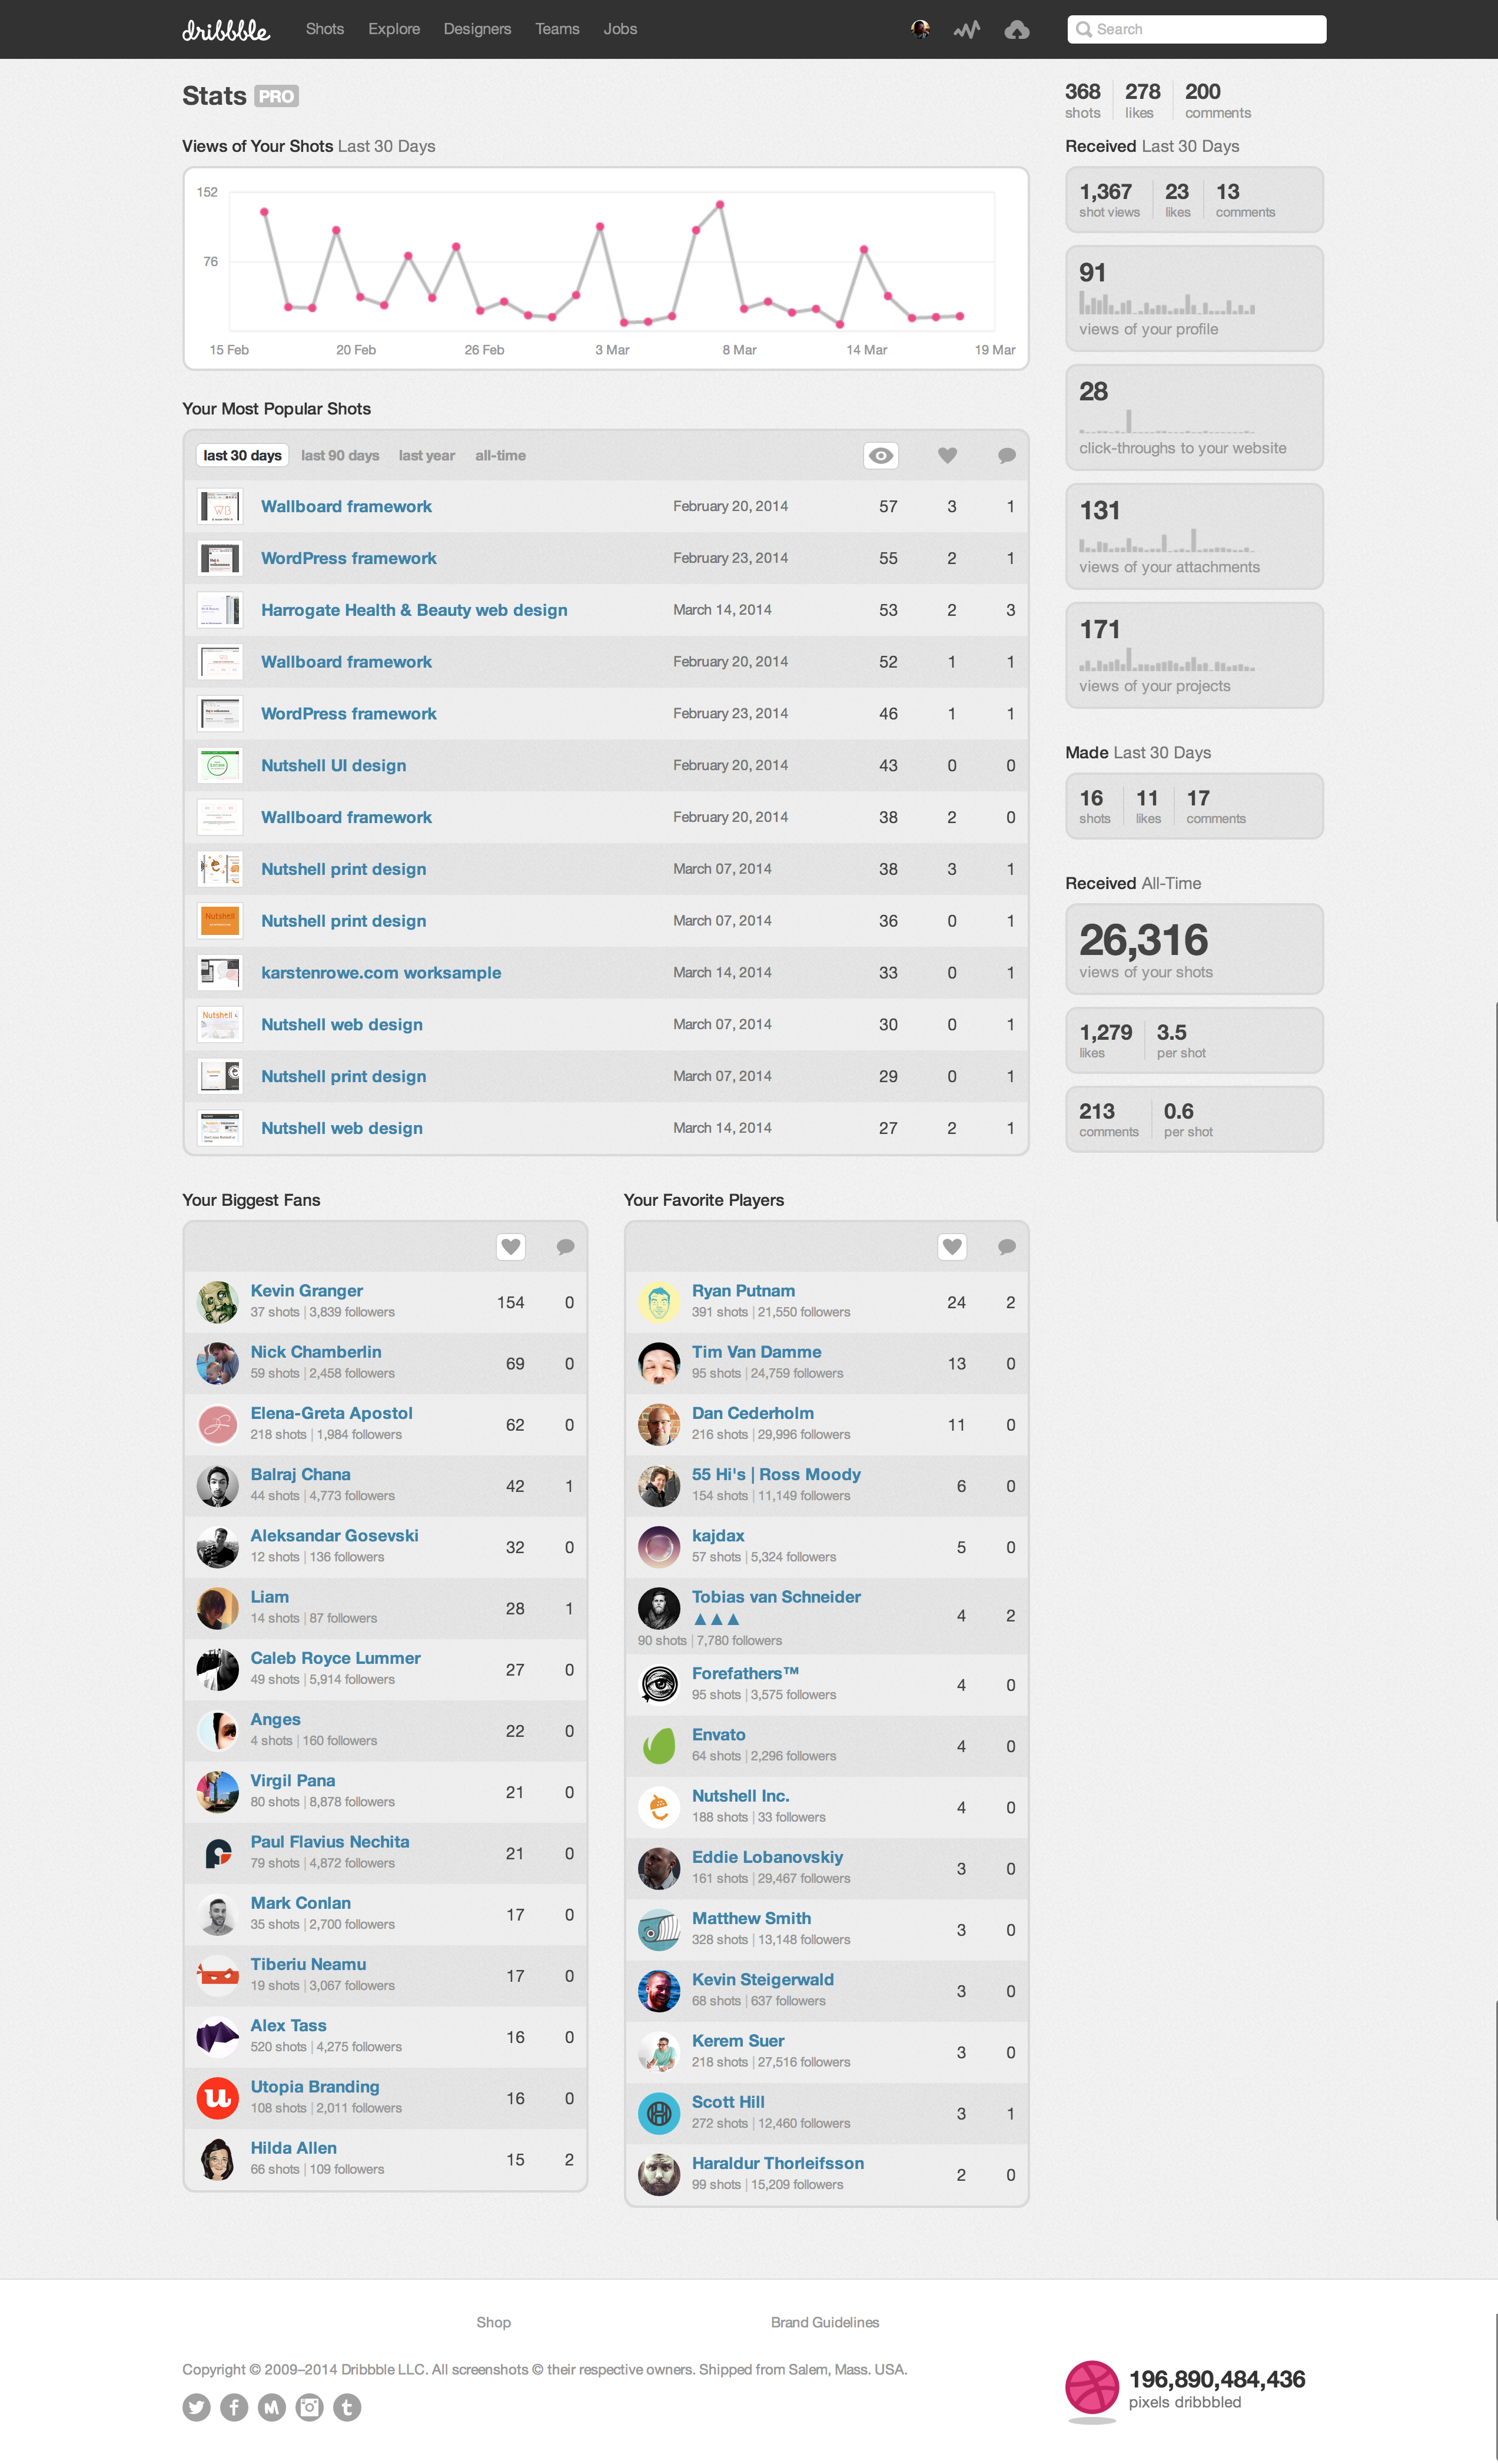 pageshot of 'Dribbble - Your Pro Stats' @ 2014-03-03-1447